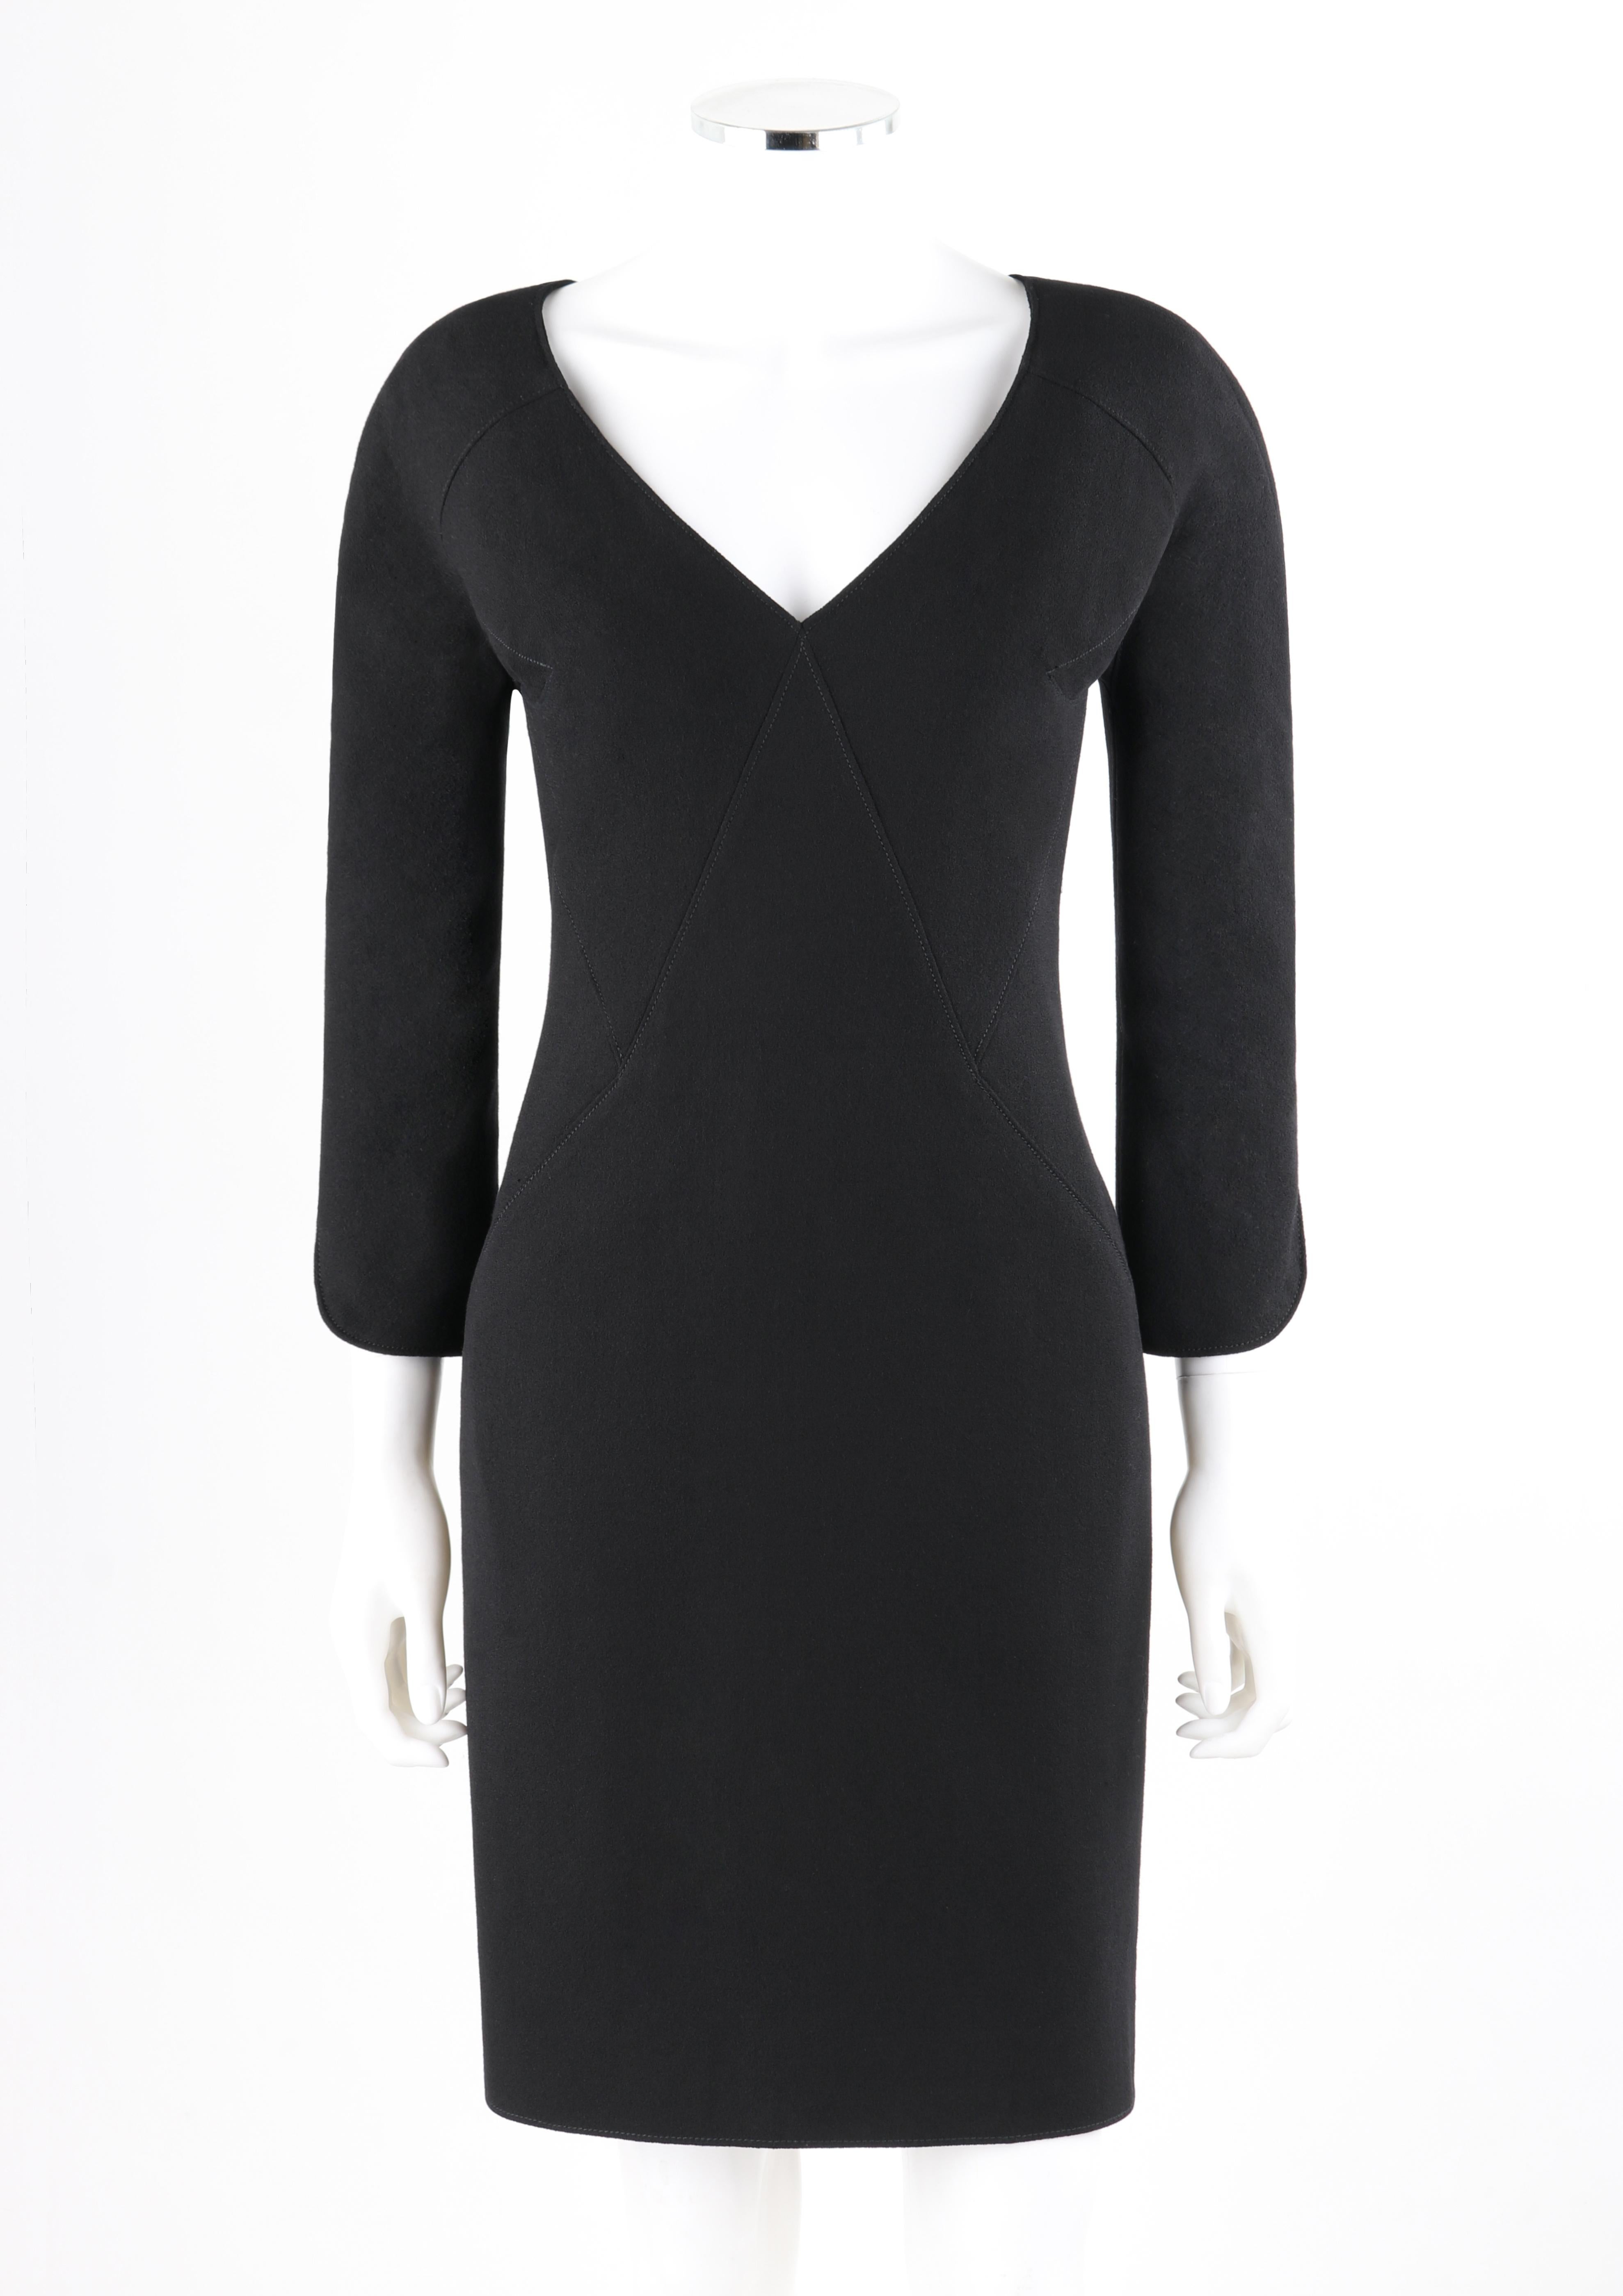 ALEXANDER McQUEEN c.2007 Black Wool Geometric Paneled V-Neck Cocktail Dress

Brand / Manufacturer: Alexander McQueen
Designer: Alexander McQueen
Collection: c.2007
Style: Sheath Dress
Color(s): Black
Lined: Yes
Marked Fabric Content: 100% Wool;